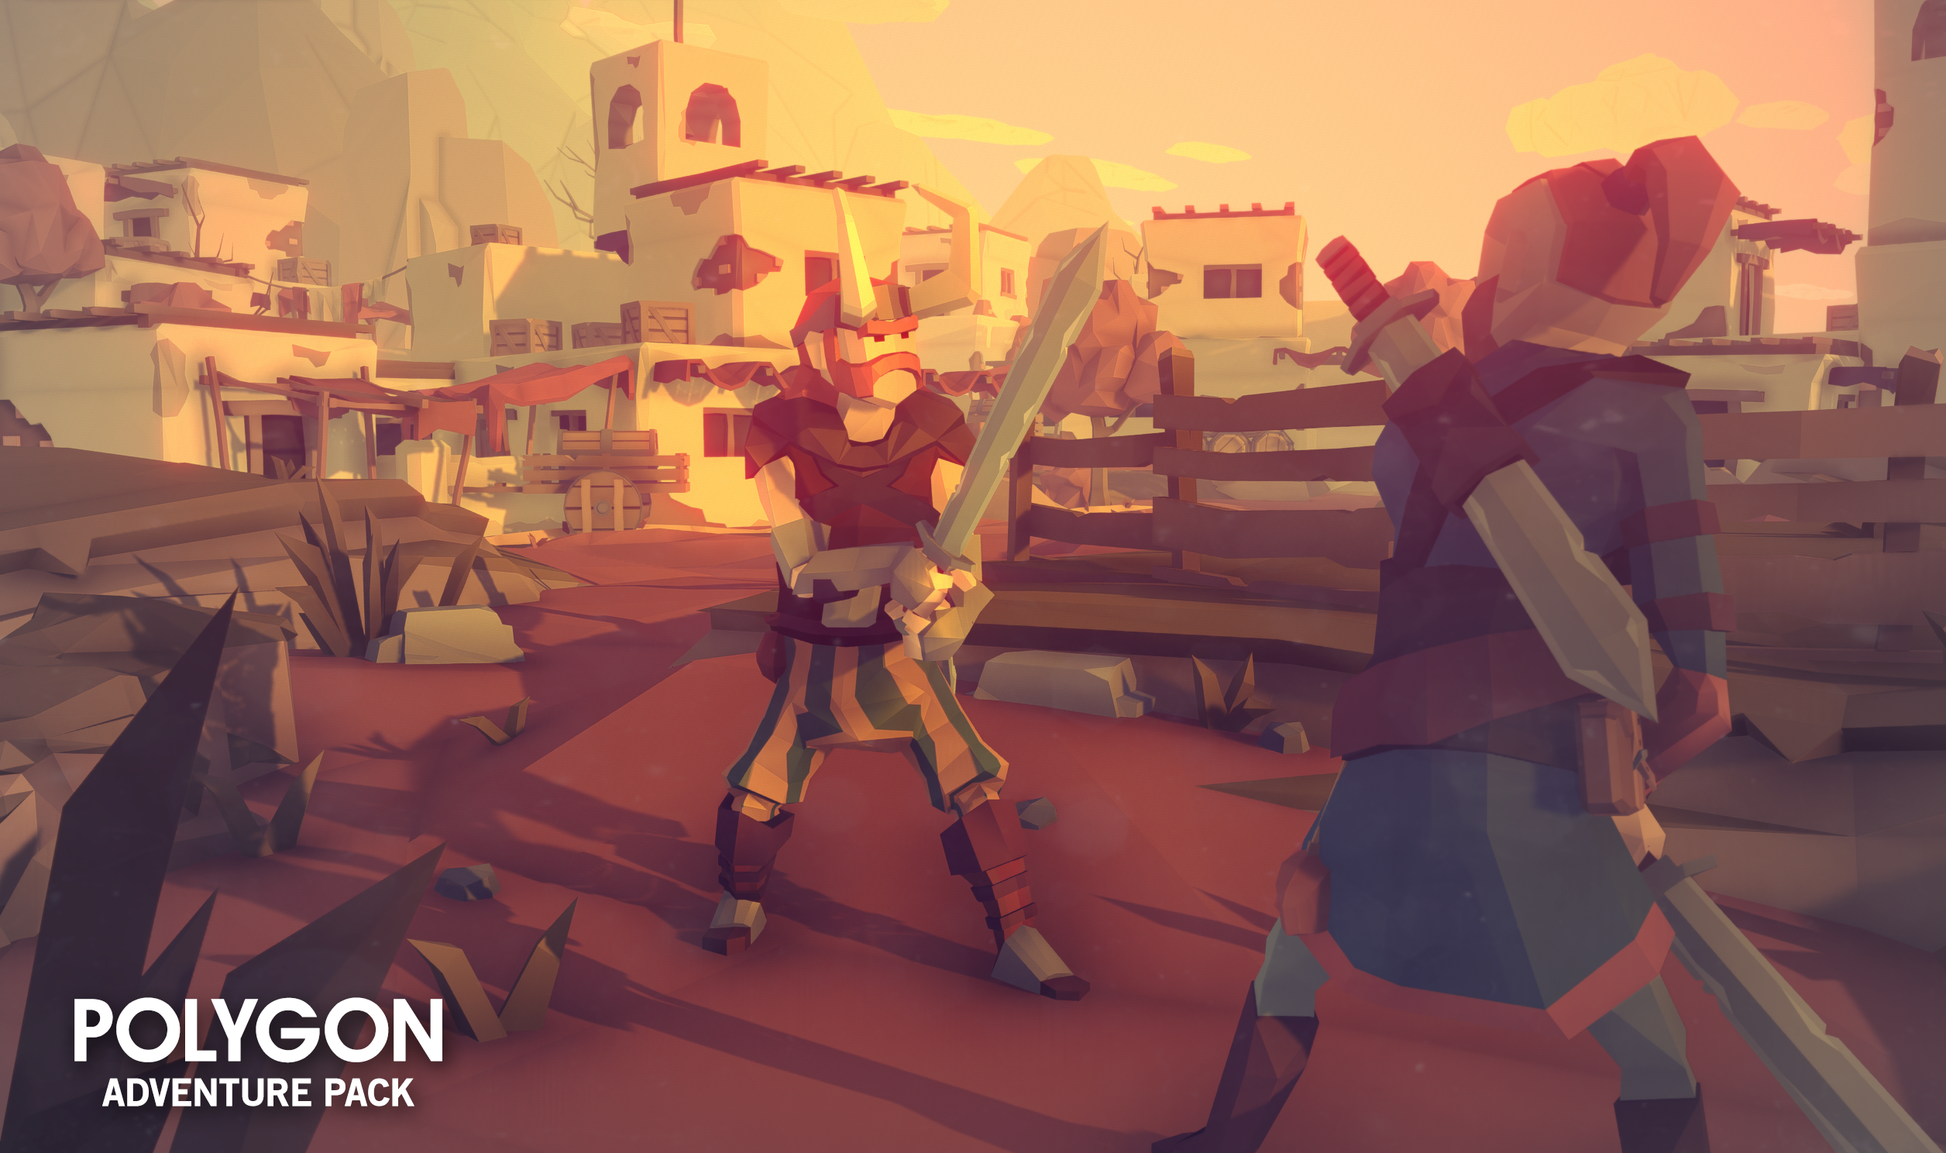 Two low poly characters fighting with swords